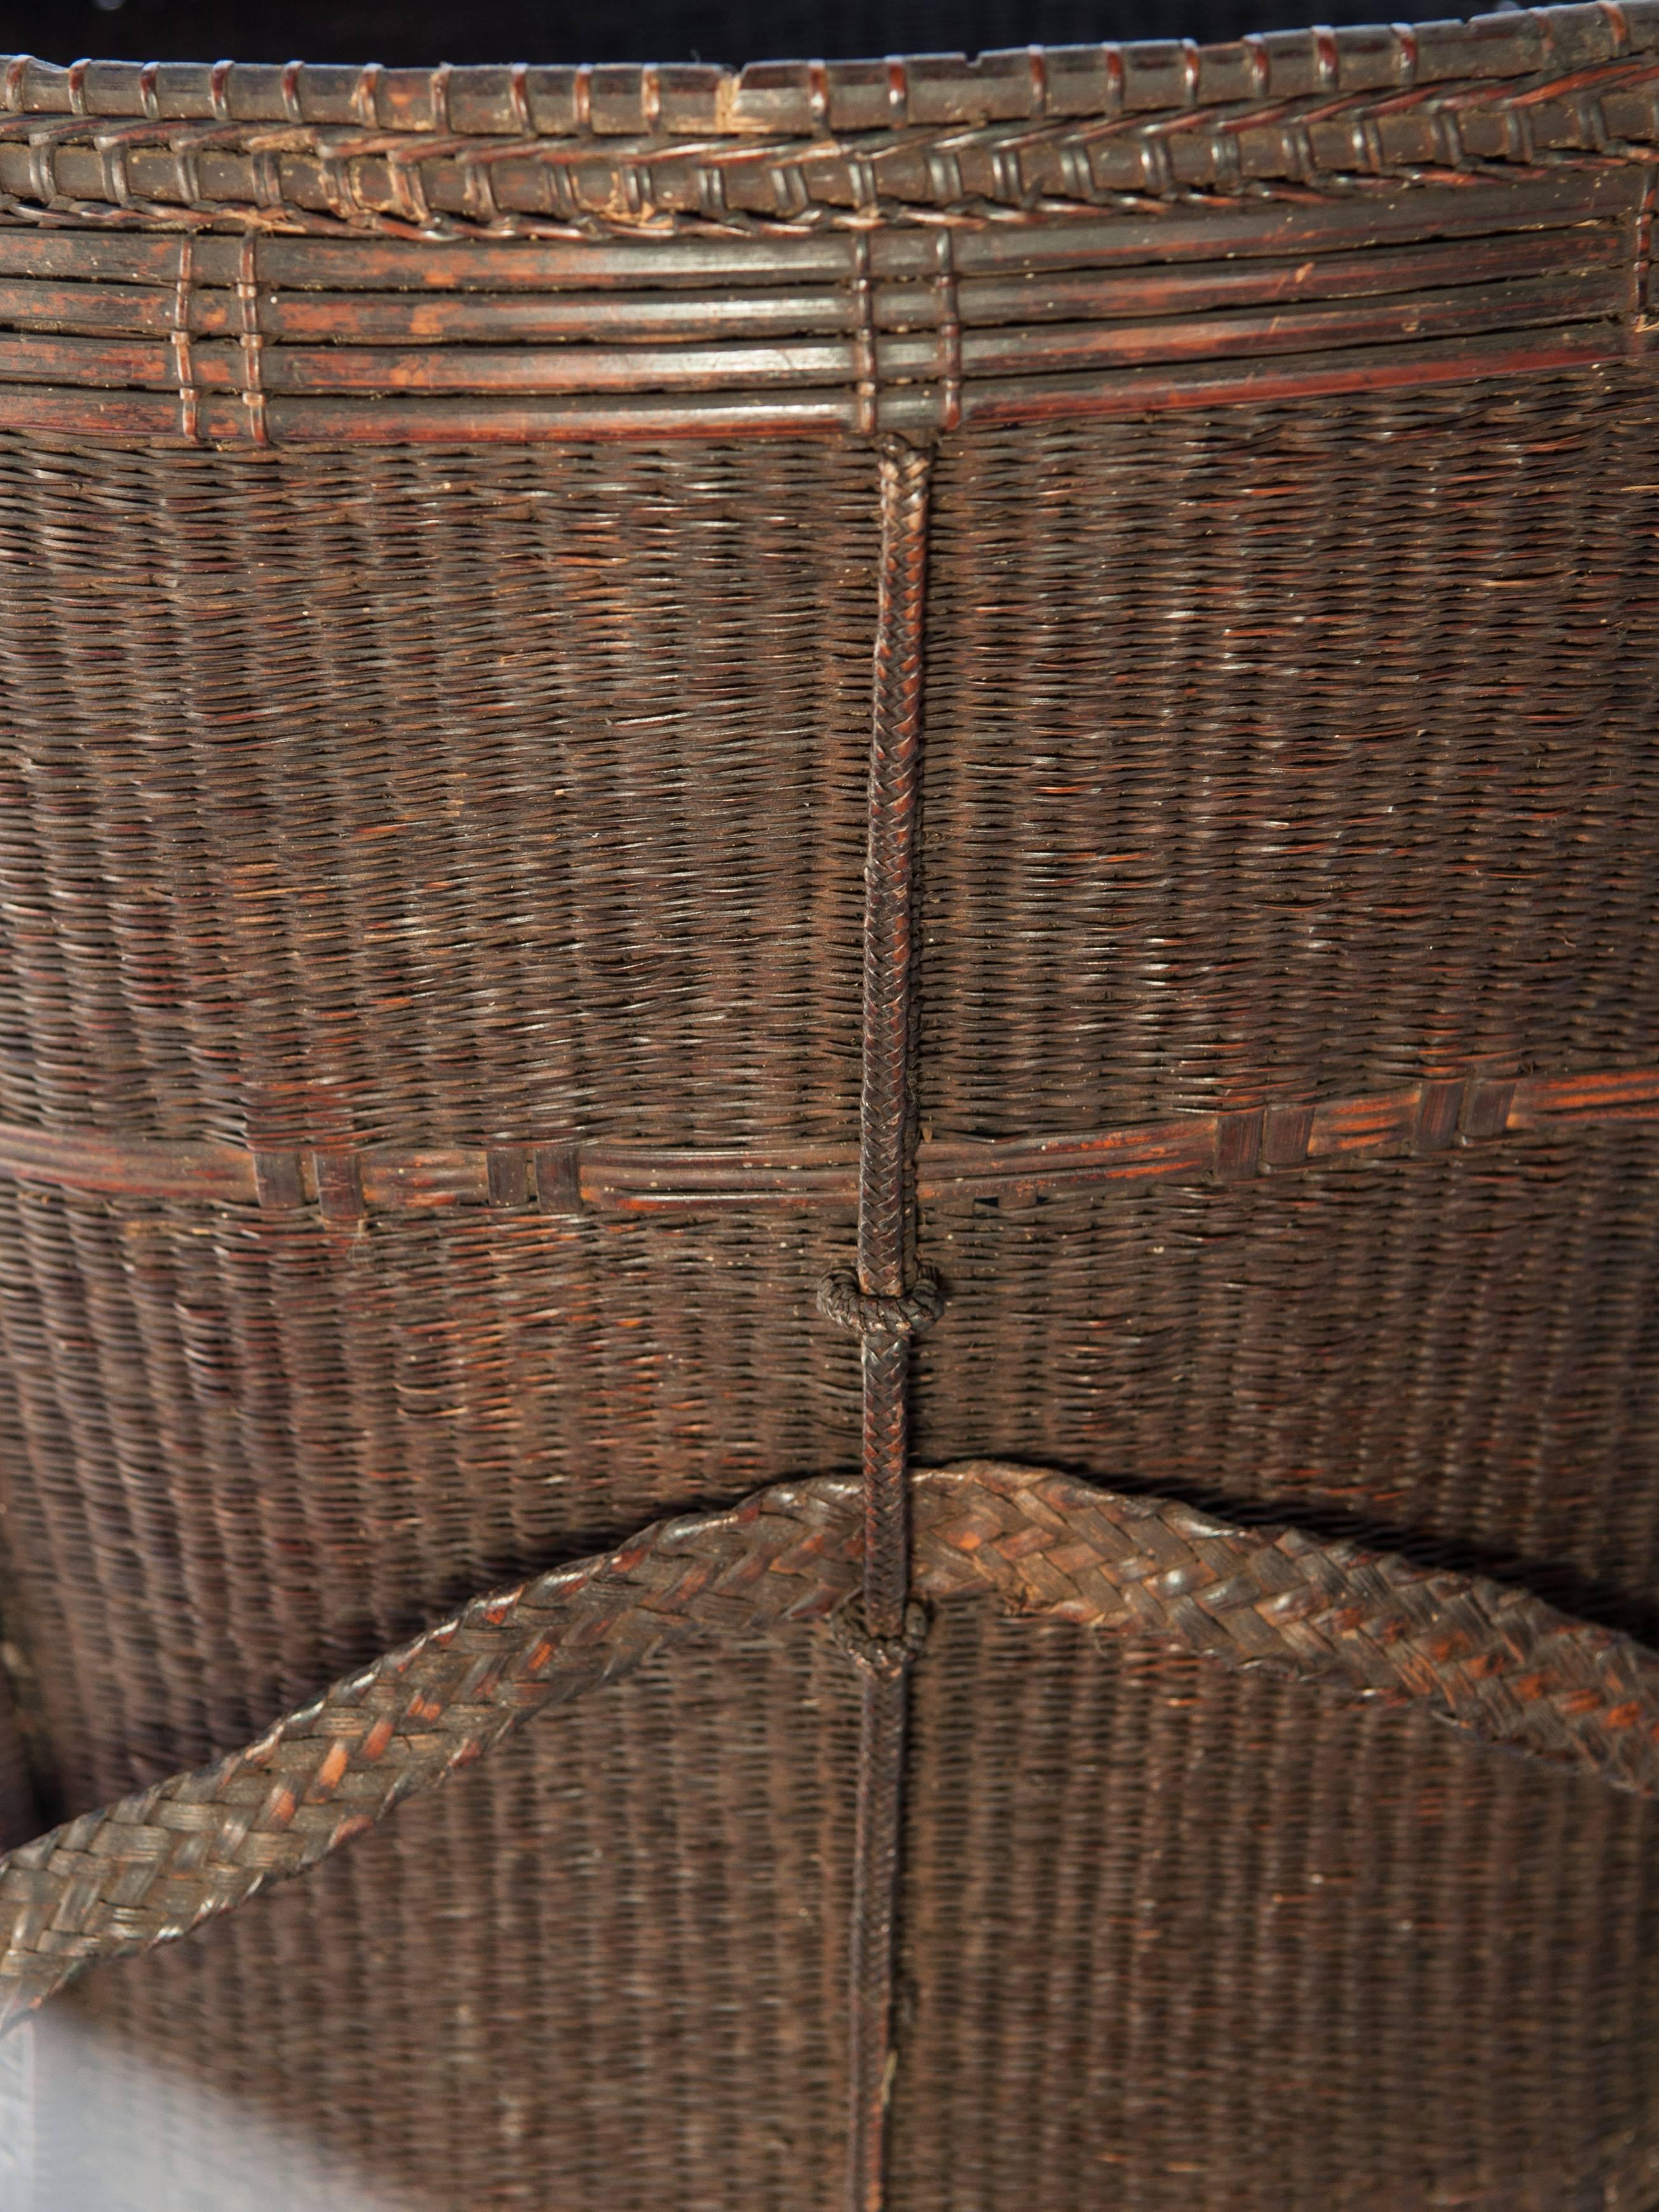 Tribal Carrying Basket from Laos, Mid-20th Century, Bamboo, Rattan, Wood Base 6